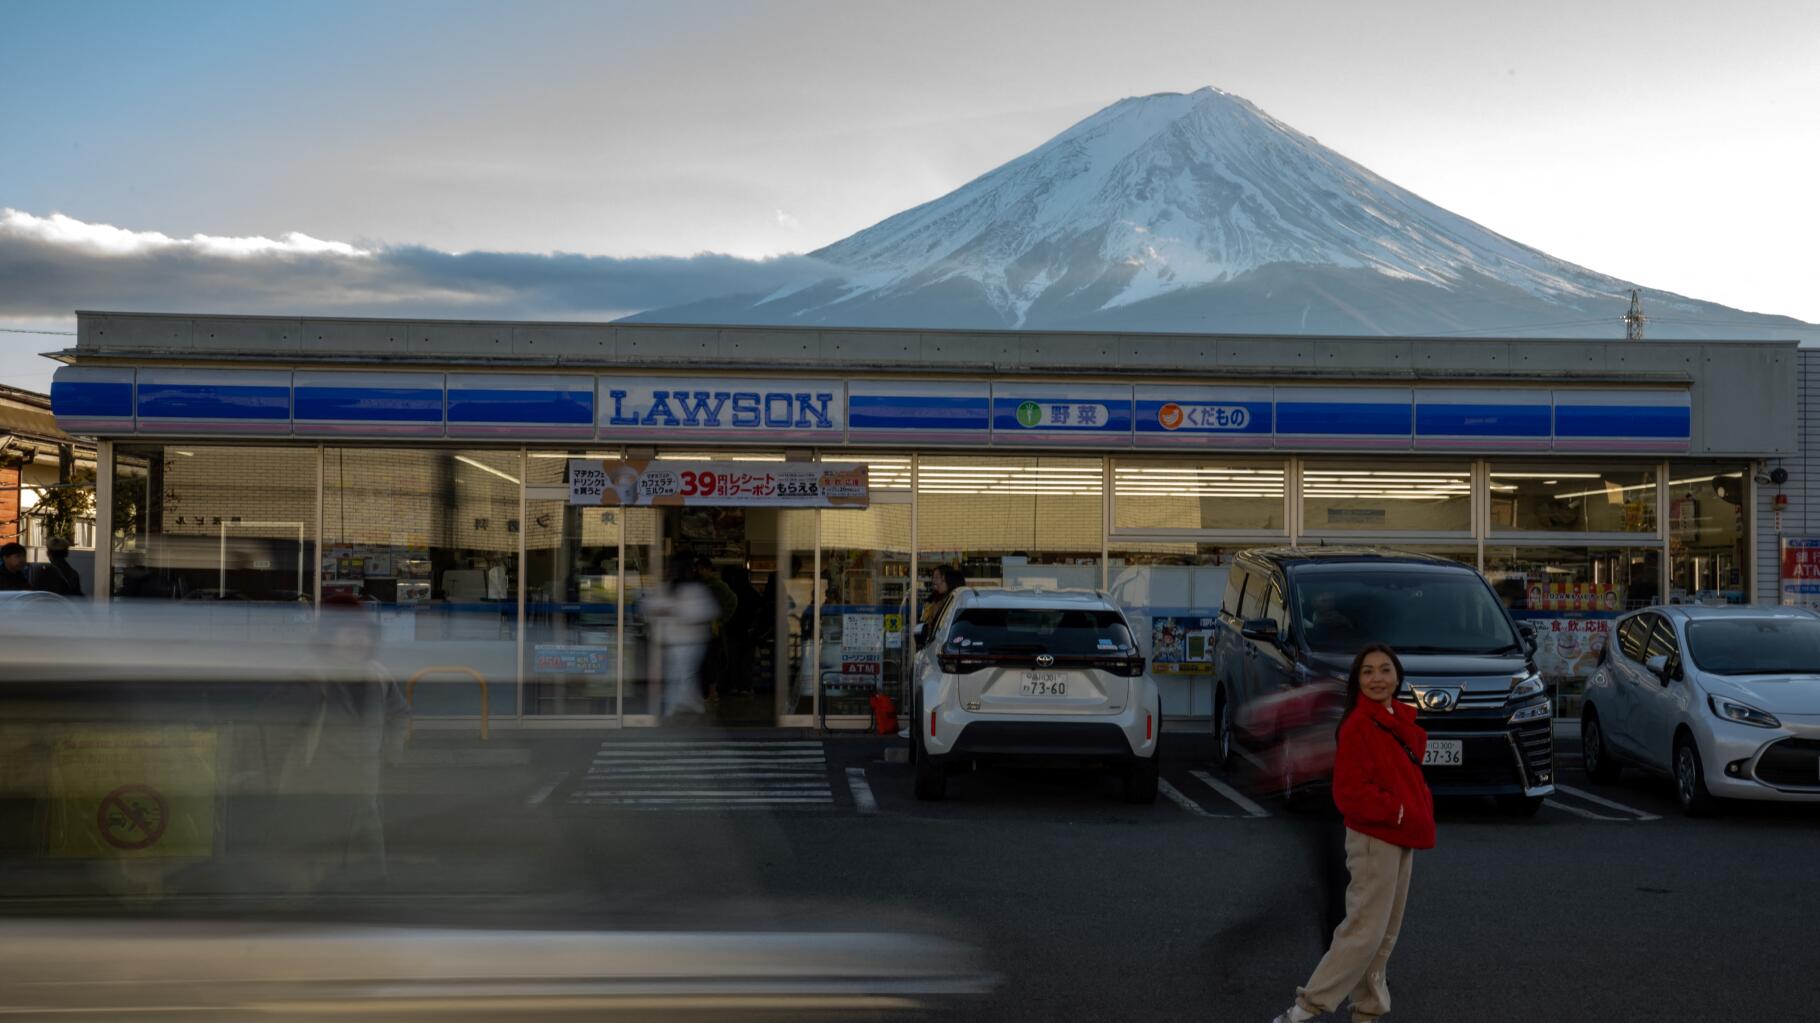 In Japan, a fence will be built in front of this store near Mount Fuji, which has become a tourist attraction